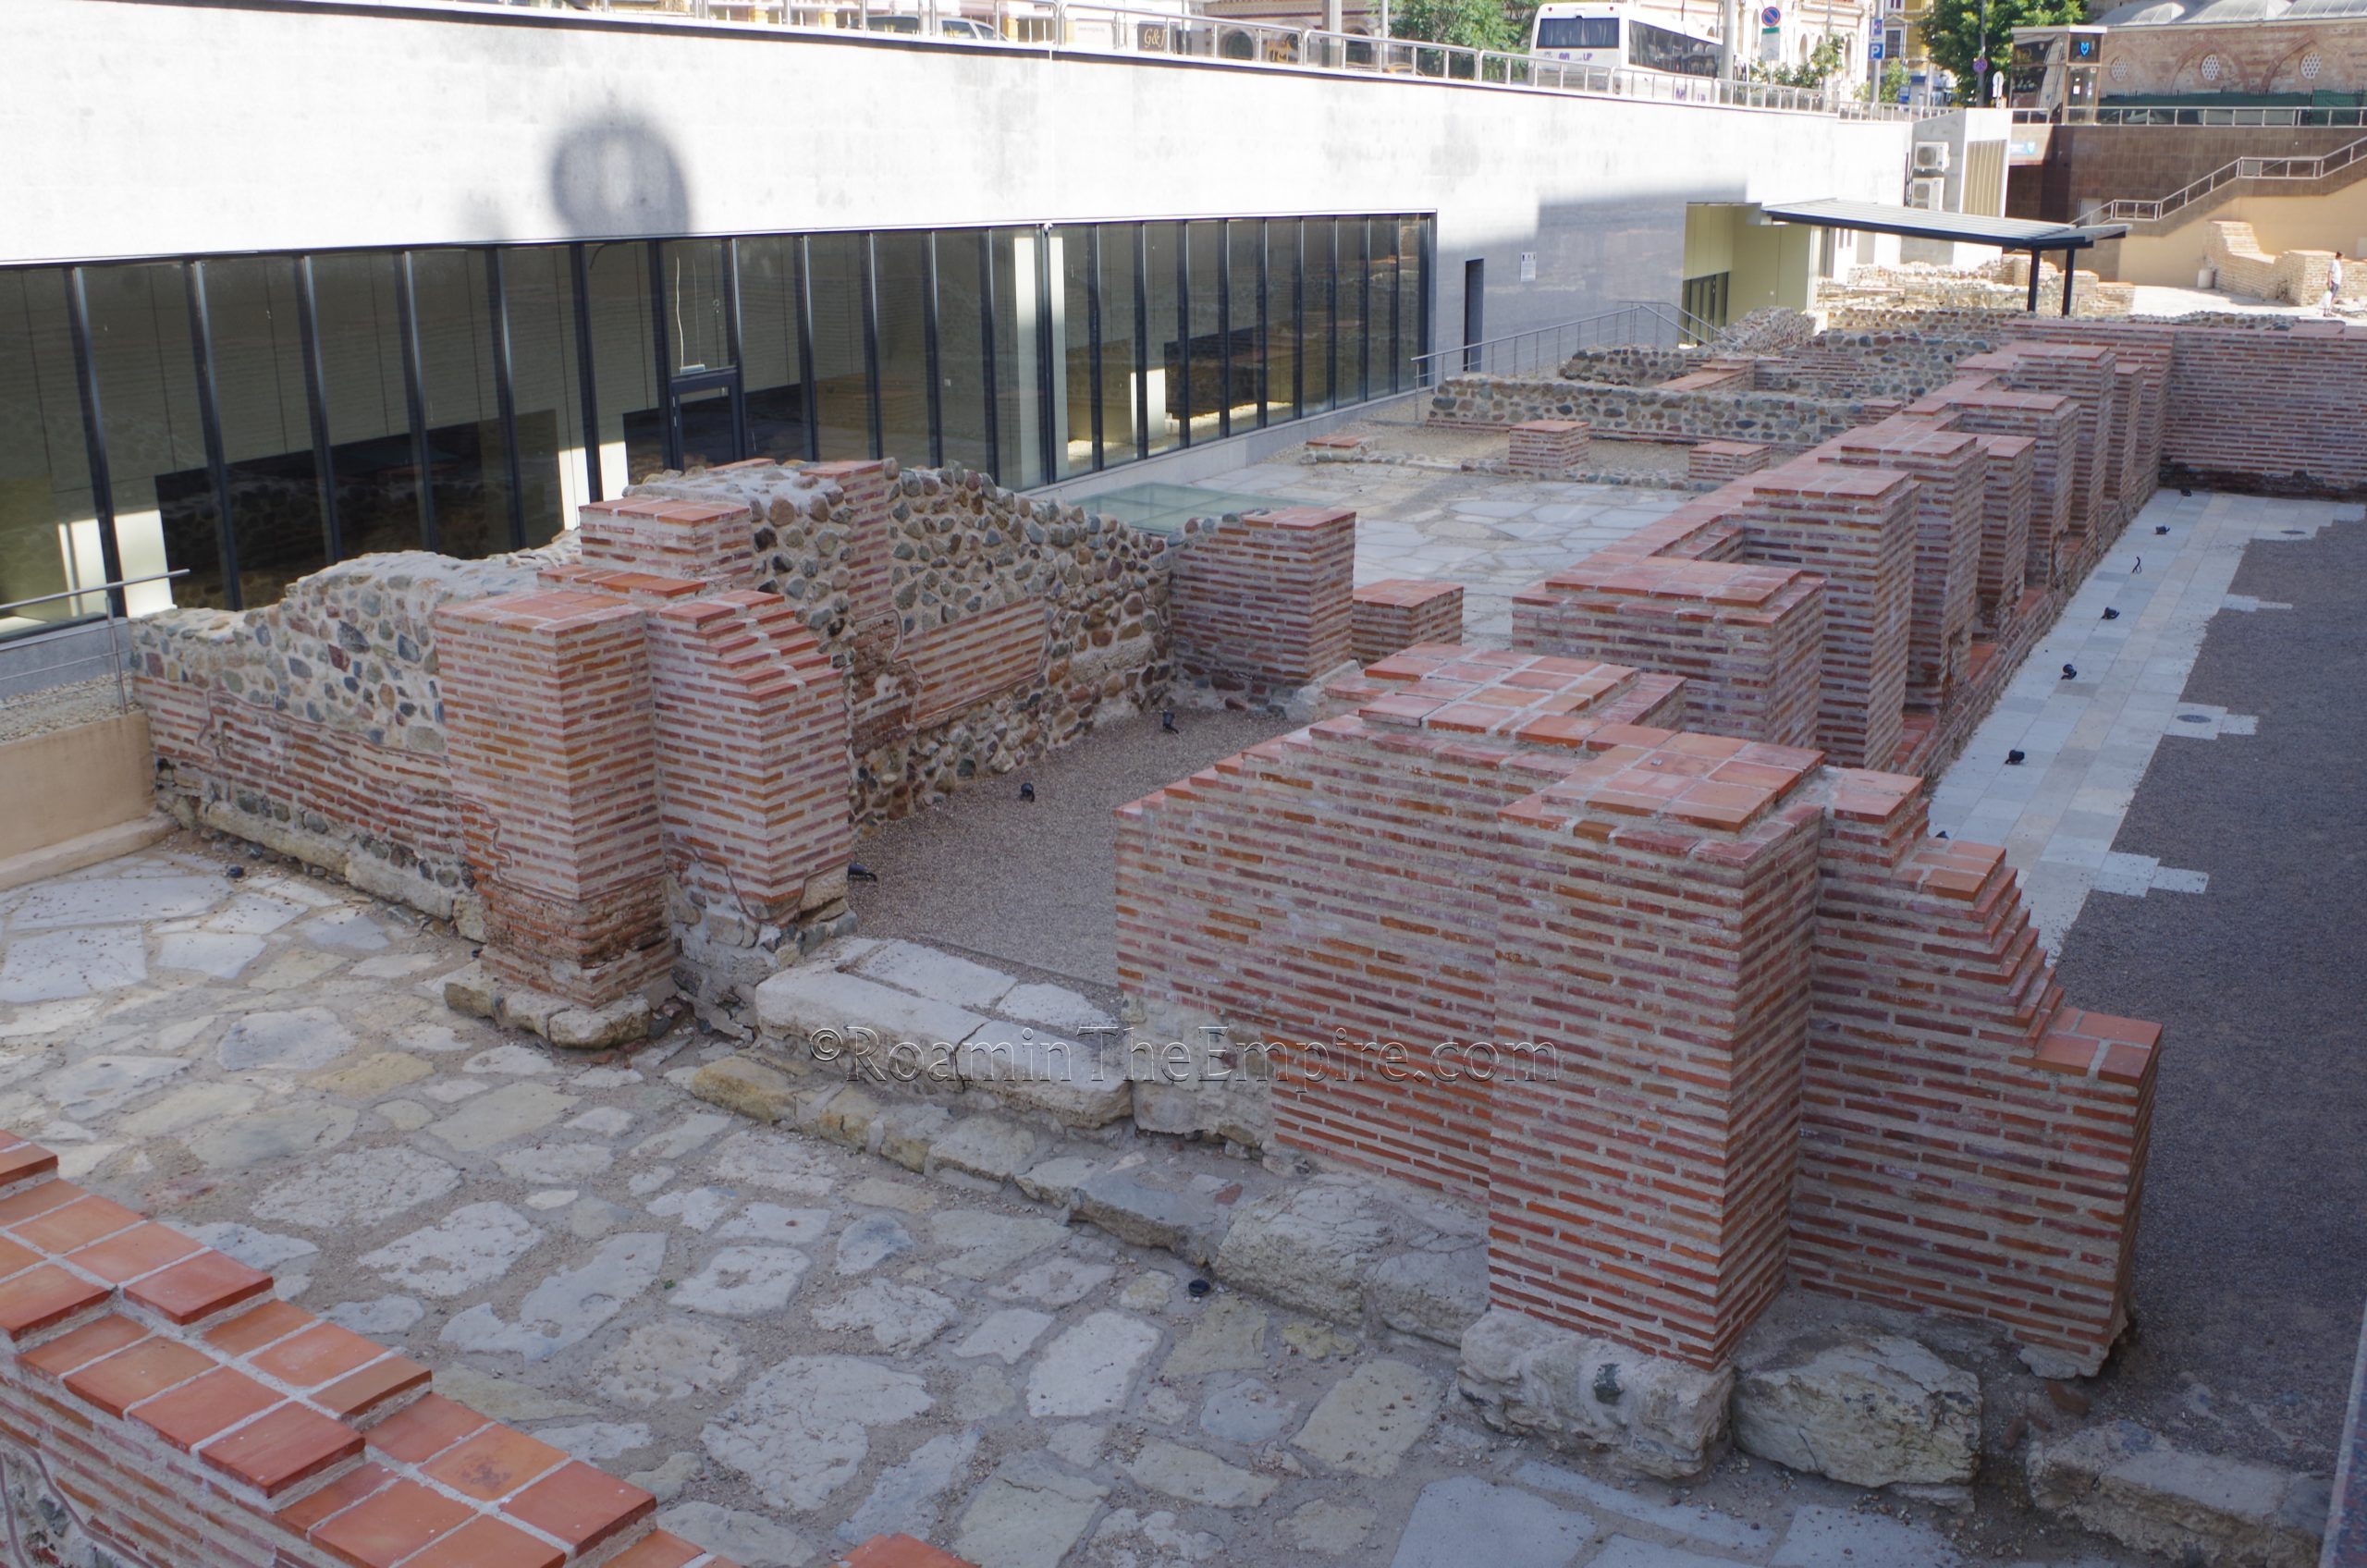 Area of the magistrate's house in Insula 2 of the Ancient Serdica Archaeological Complex.